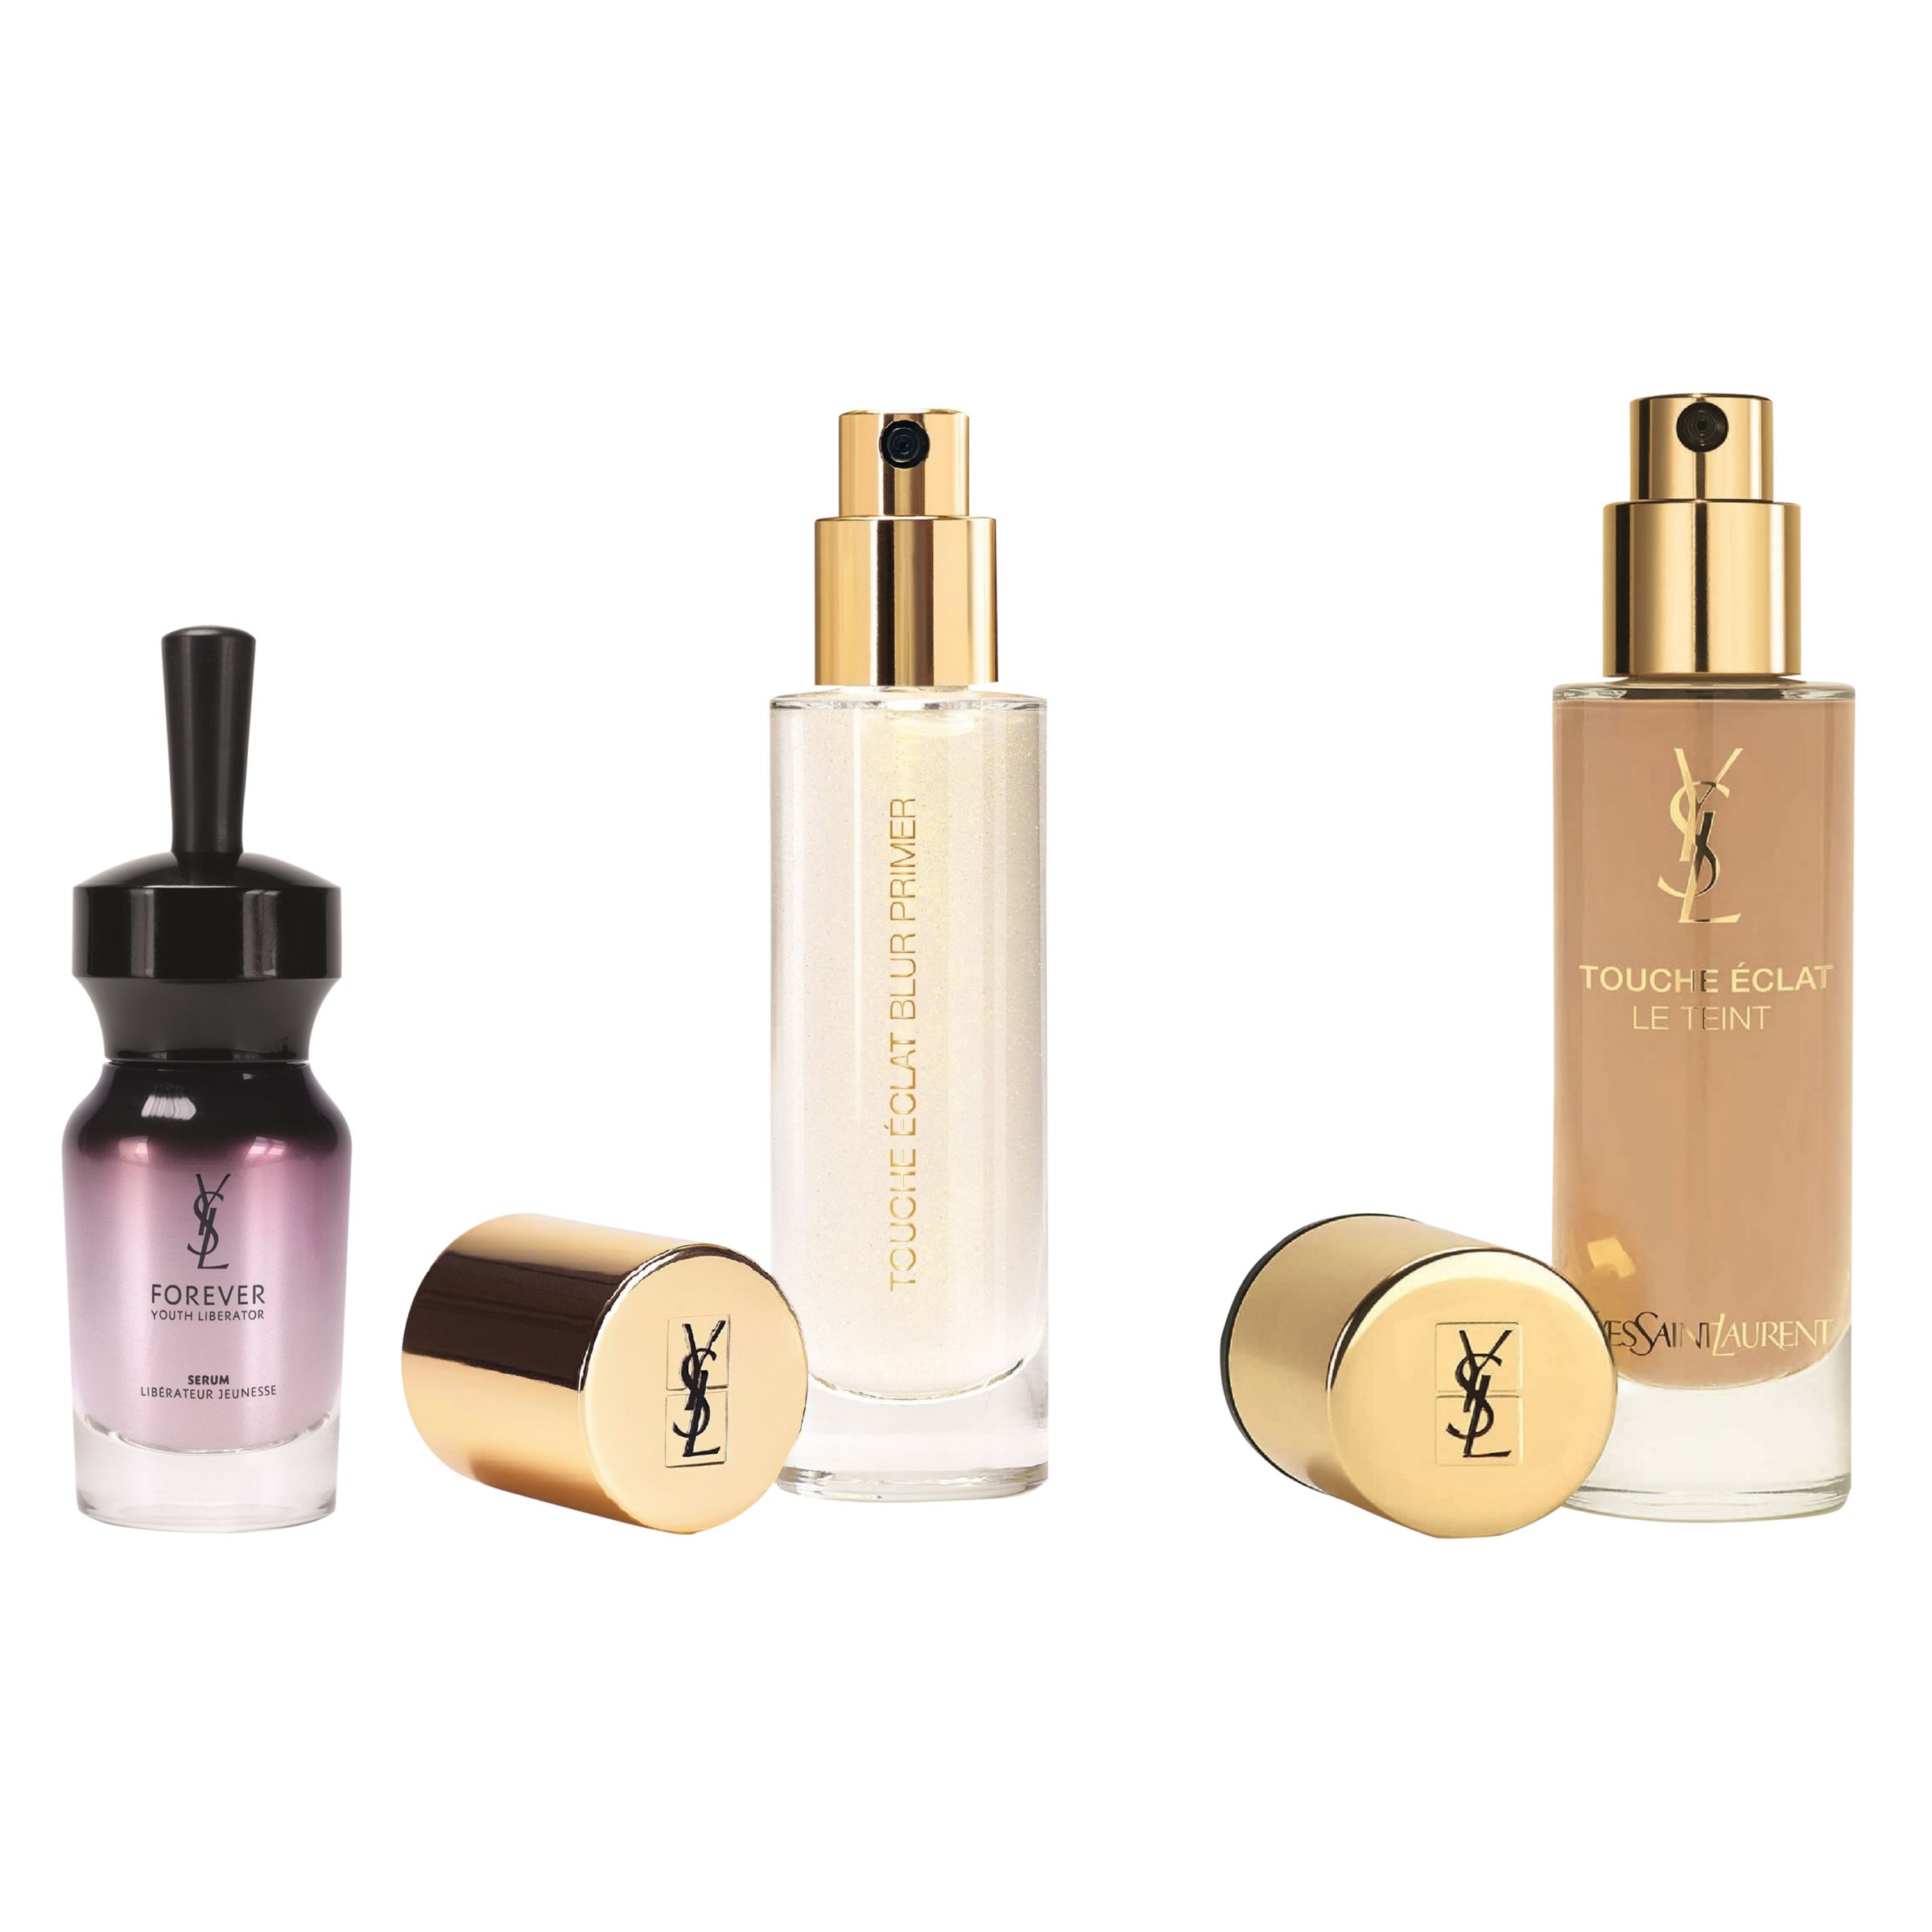 Yves Saint Laurent Touche Éclat Blur Primer and Foundation B45 with Free Gift